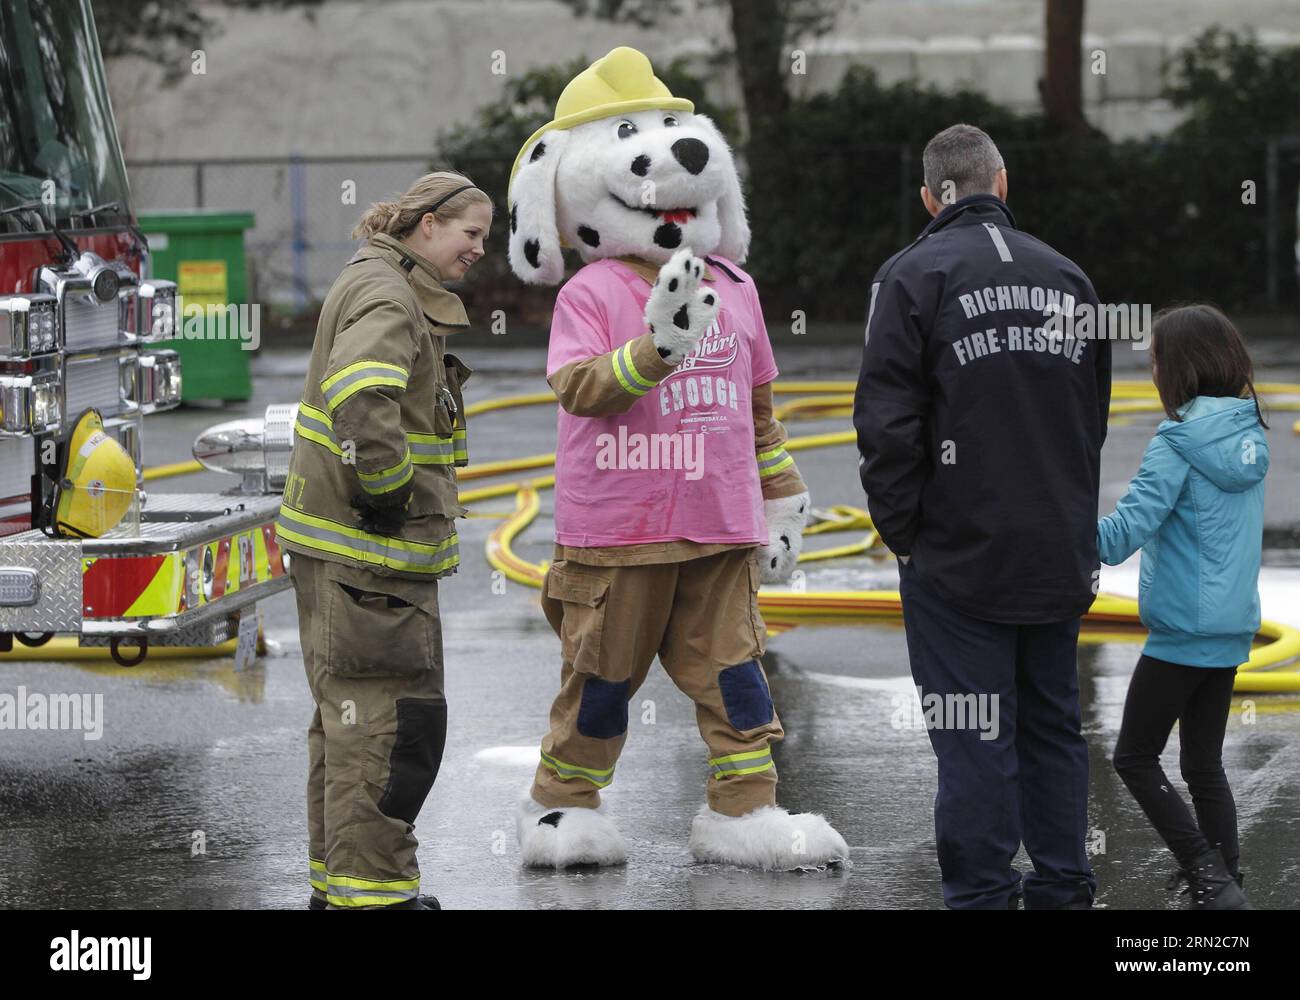 (150226) -- RICHMOND, Feb. 25, 2015 -- A mascot of fire hall wearing pink shirt to support anti-bullying greets a schoolgirl at a fire hall in Richmond, Canada, Feb. 25, 2015. People from different organizations and schools across Canada wear pink shirts on the annual Pink Shirt Day to raise awareness and support anti-bullying. ) (djj) CANADA-RICHMOND-ANTI-BULLYING-PINK SHIRT DAY LiangxSen PUBLICATIONxNOTxINxCHN   Richmond Feb 25 2015 a mascot of Fire Hall Wearing Pink Shirt to Support Anti bullying greets a schoolgirl AT a Fire Hall in Richmond Canada Feb 25 2015 Celebrities from different Or Stock Photo